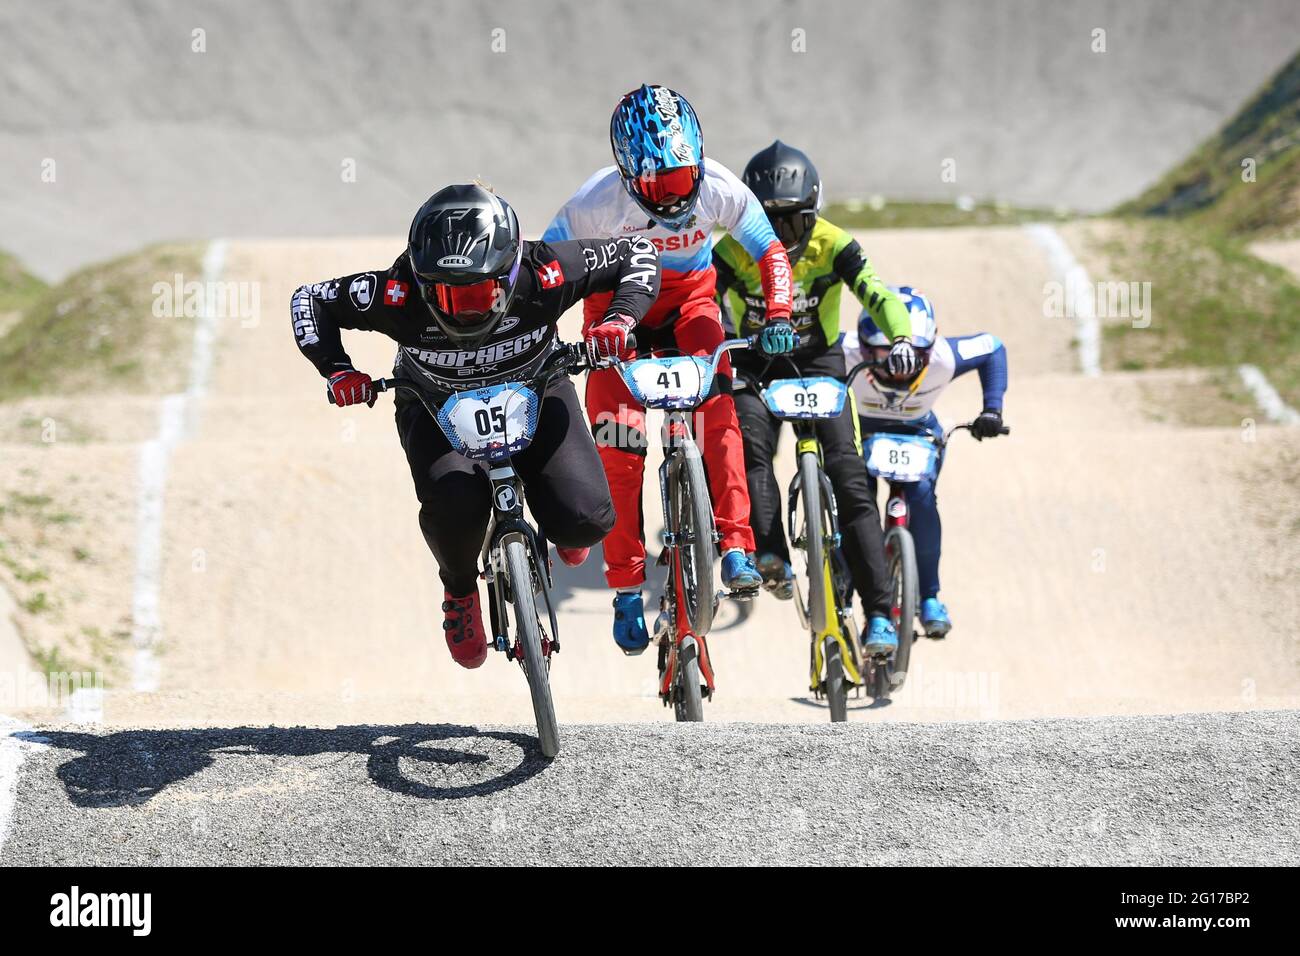 Derive wasteland Perception Nadie AEBERHARD of Switzerland (05) leads the race during the UEC BMX  European Cup Round 2 at the BMX Olympic Arena on May 2nd 2021 in Verona,  Italy Stock Photo - Alamy